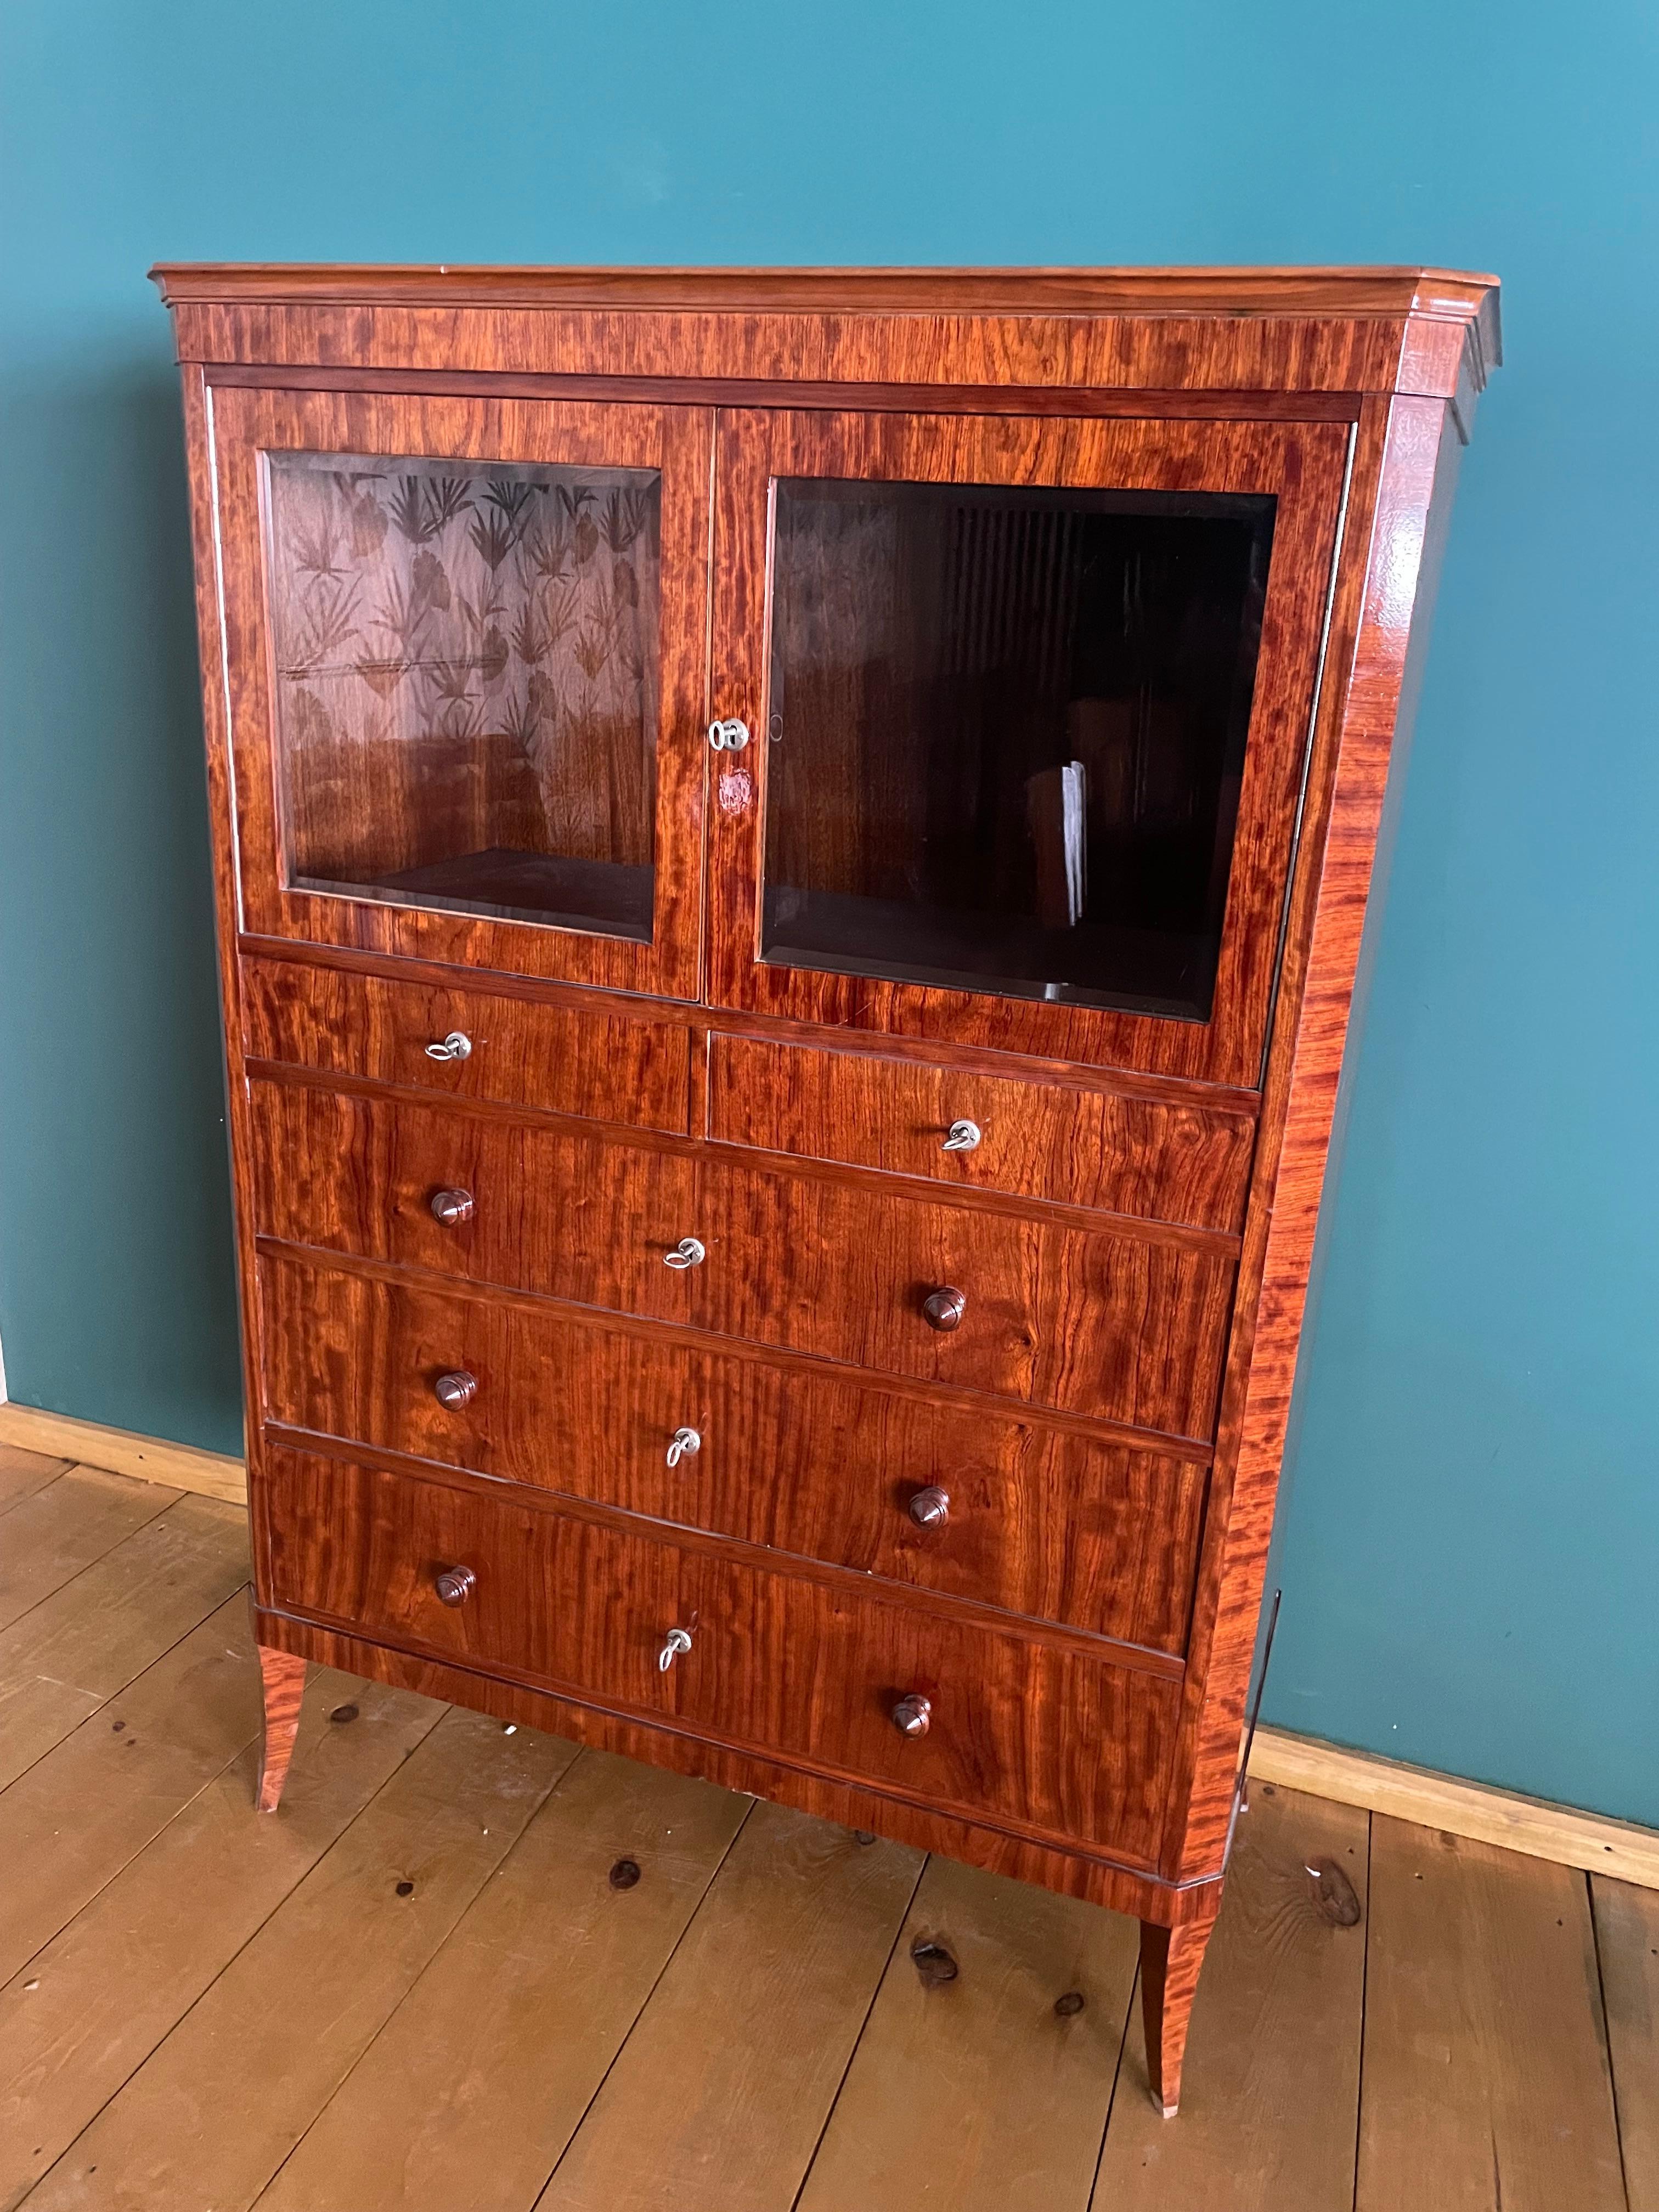 Every piece of furniture that leaves our workshop from the beginning to the end is subjected to manual renovation, so as to restore its original condition from many years ago.

Simplicity and elegance as well as timelessnes in one item.